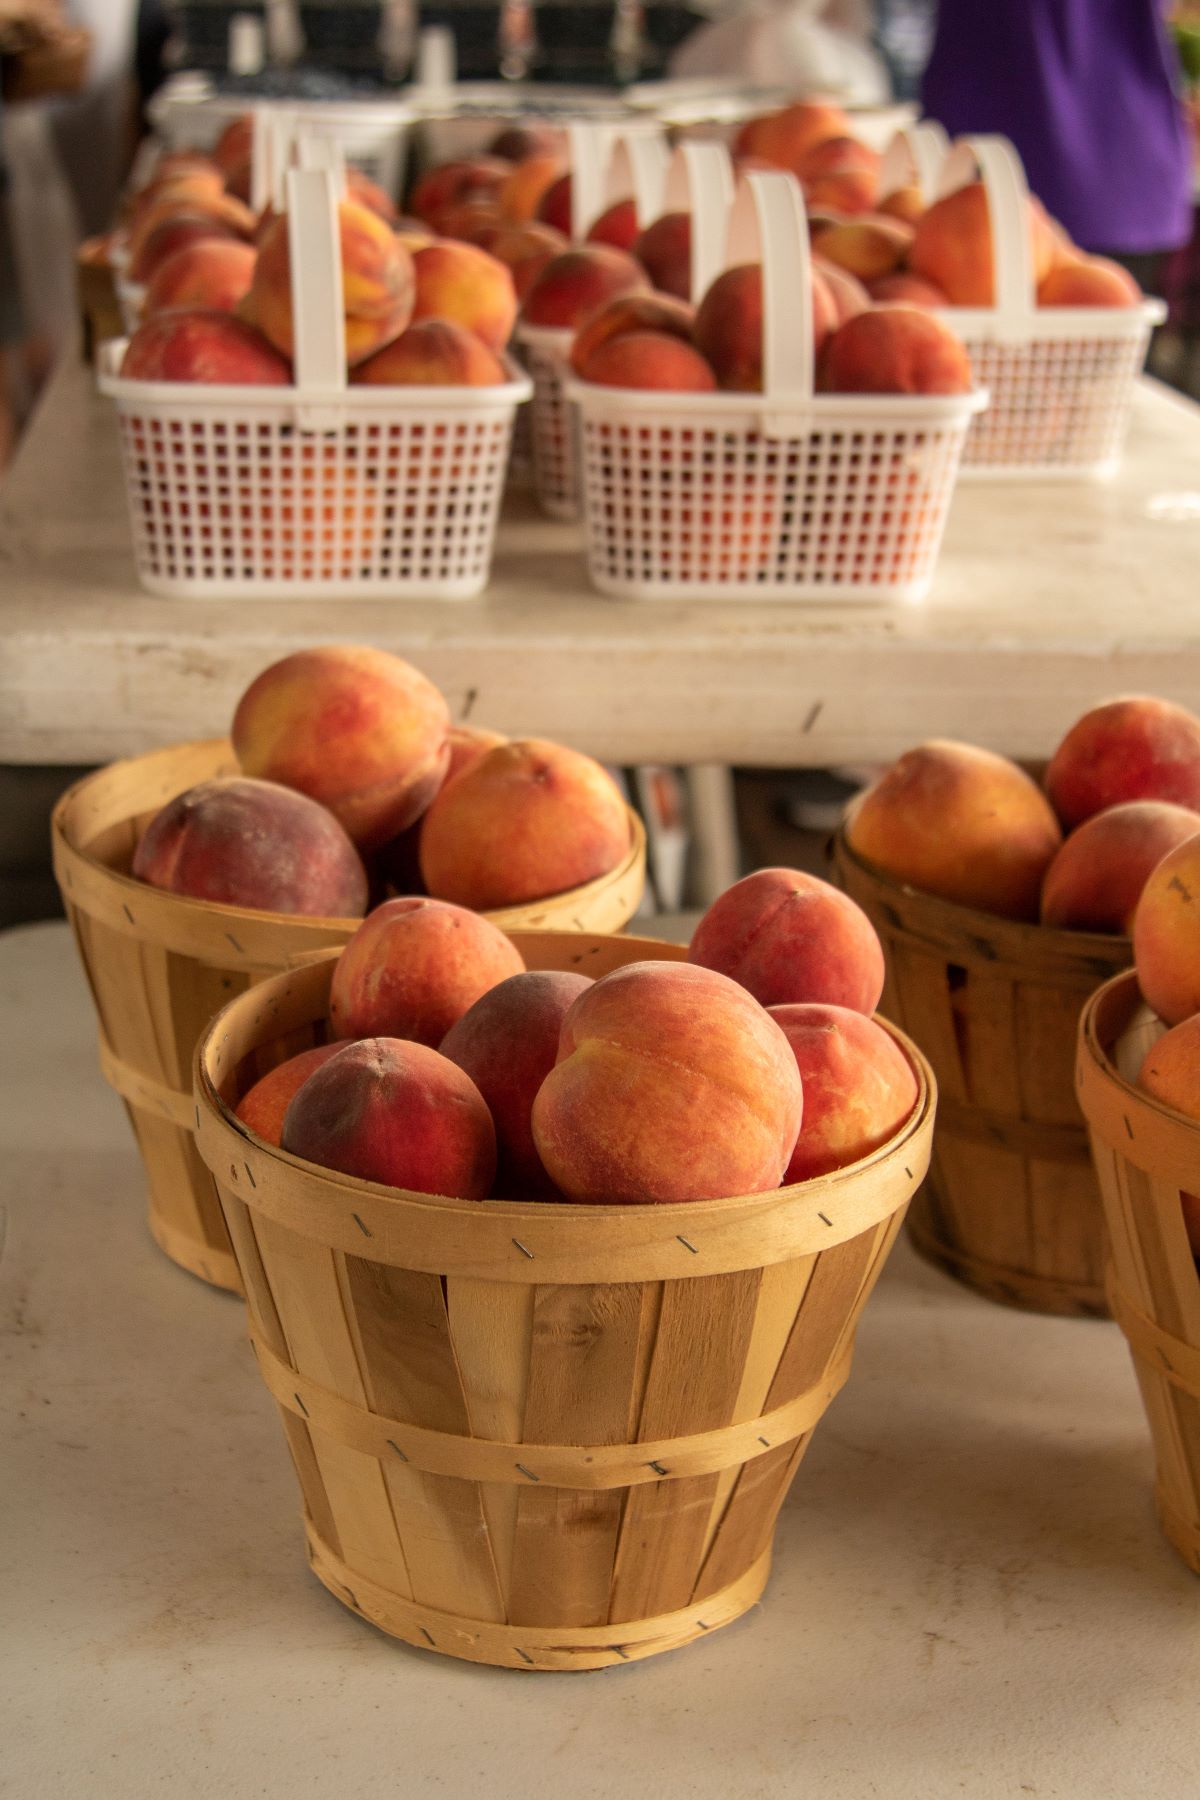 Peaches  Agricultural Marketing Resource Center